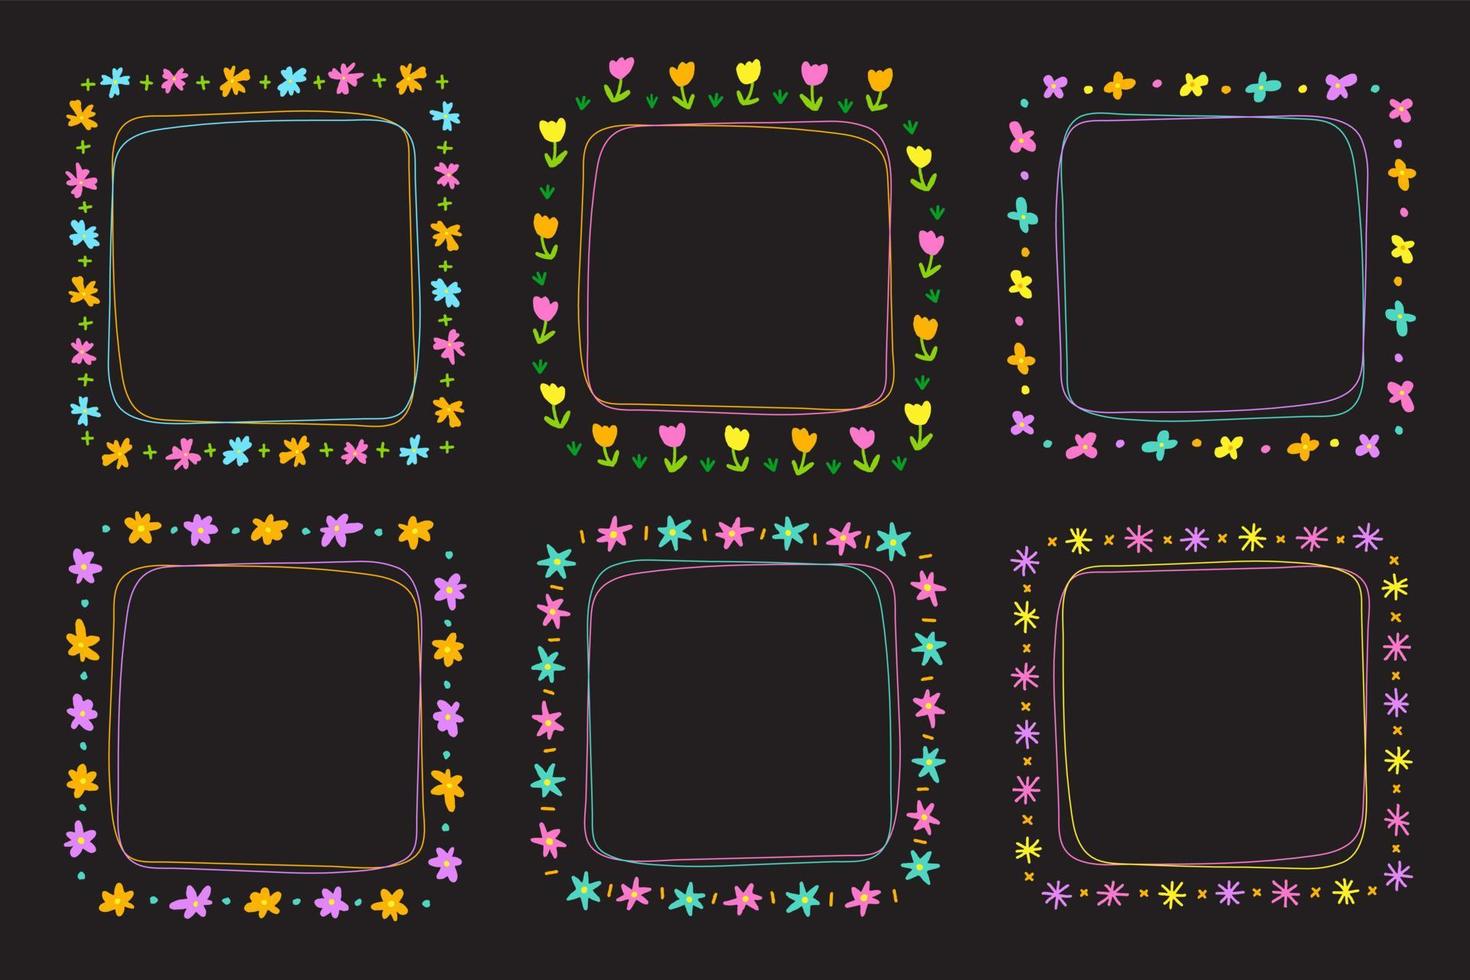 Cute Neon Abstract Daisy Flower Square Doodle Free Hand Drawing Drawn Line Borders Frames Wreath Plate Set Collection Flat Style Rainbow Colorful Black Background Vector Illustration Pack